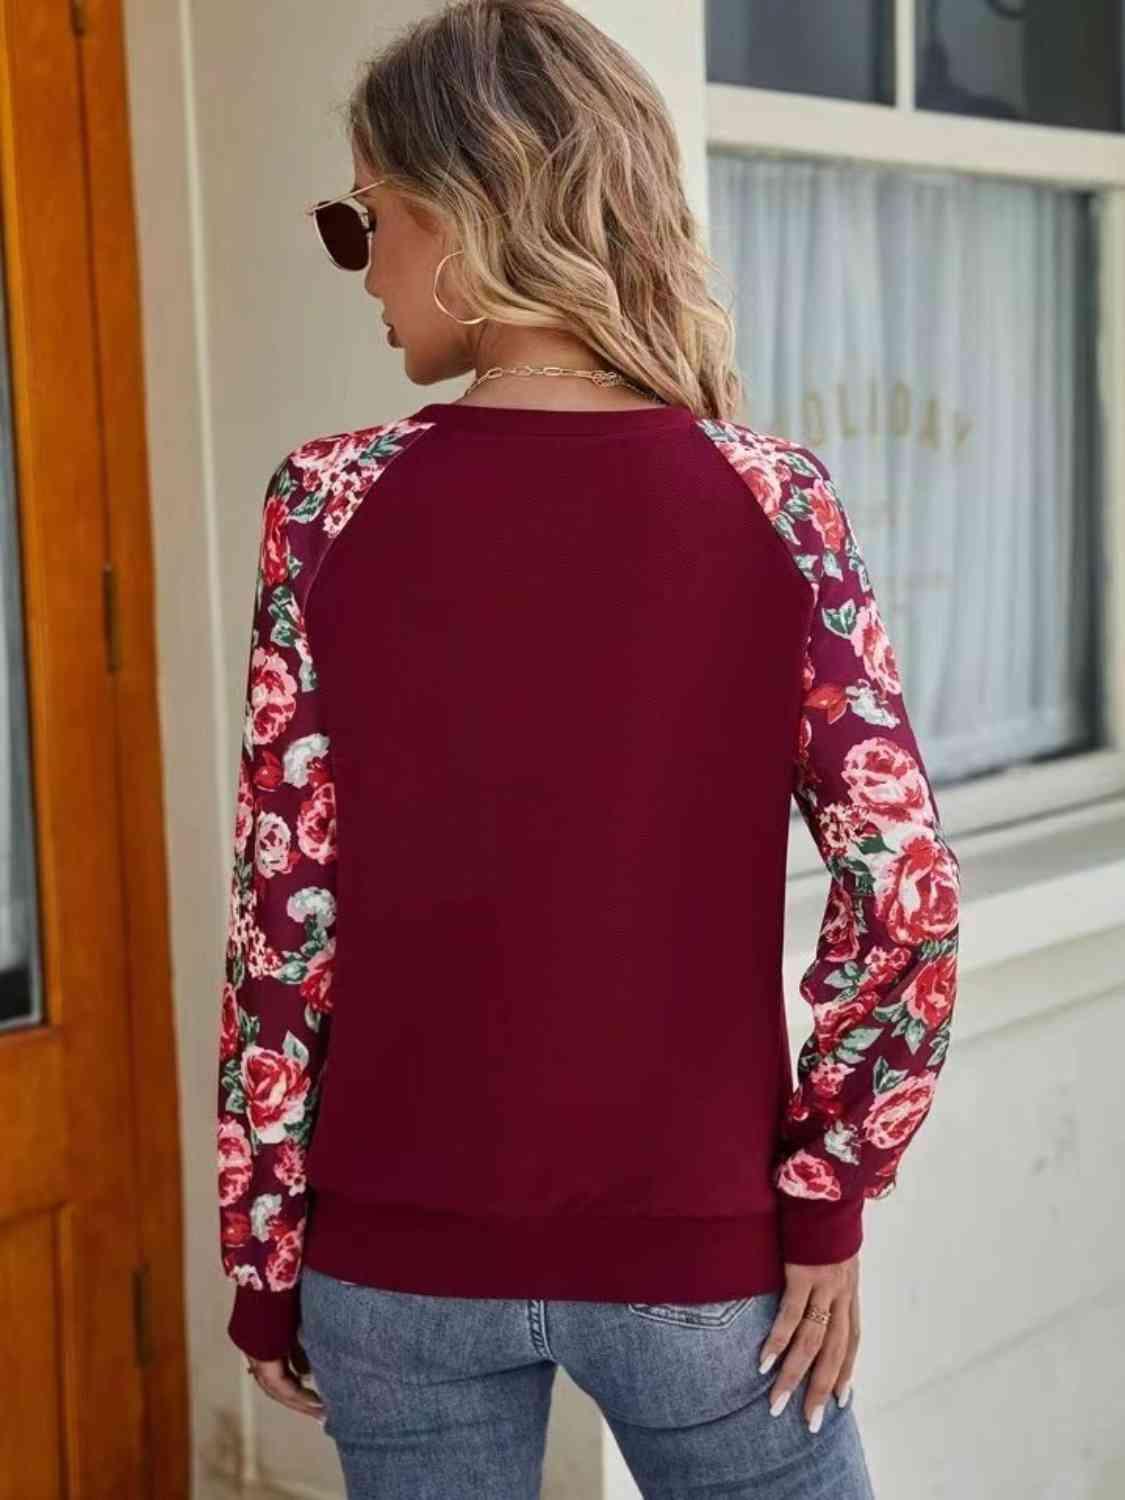 a woman wearing a red sweater with floral sleeves